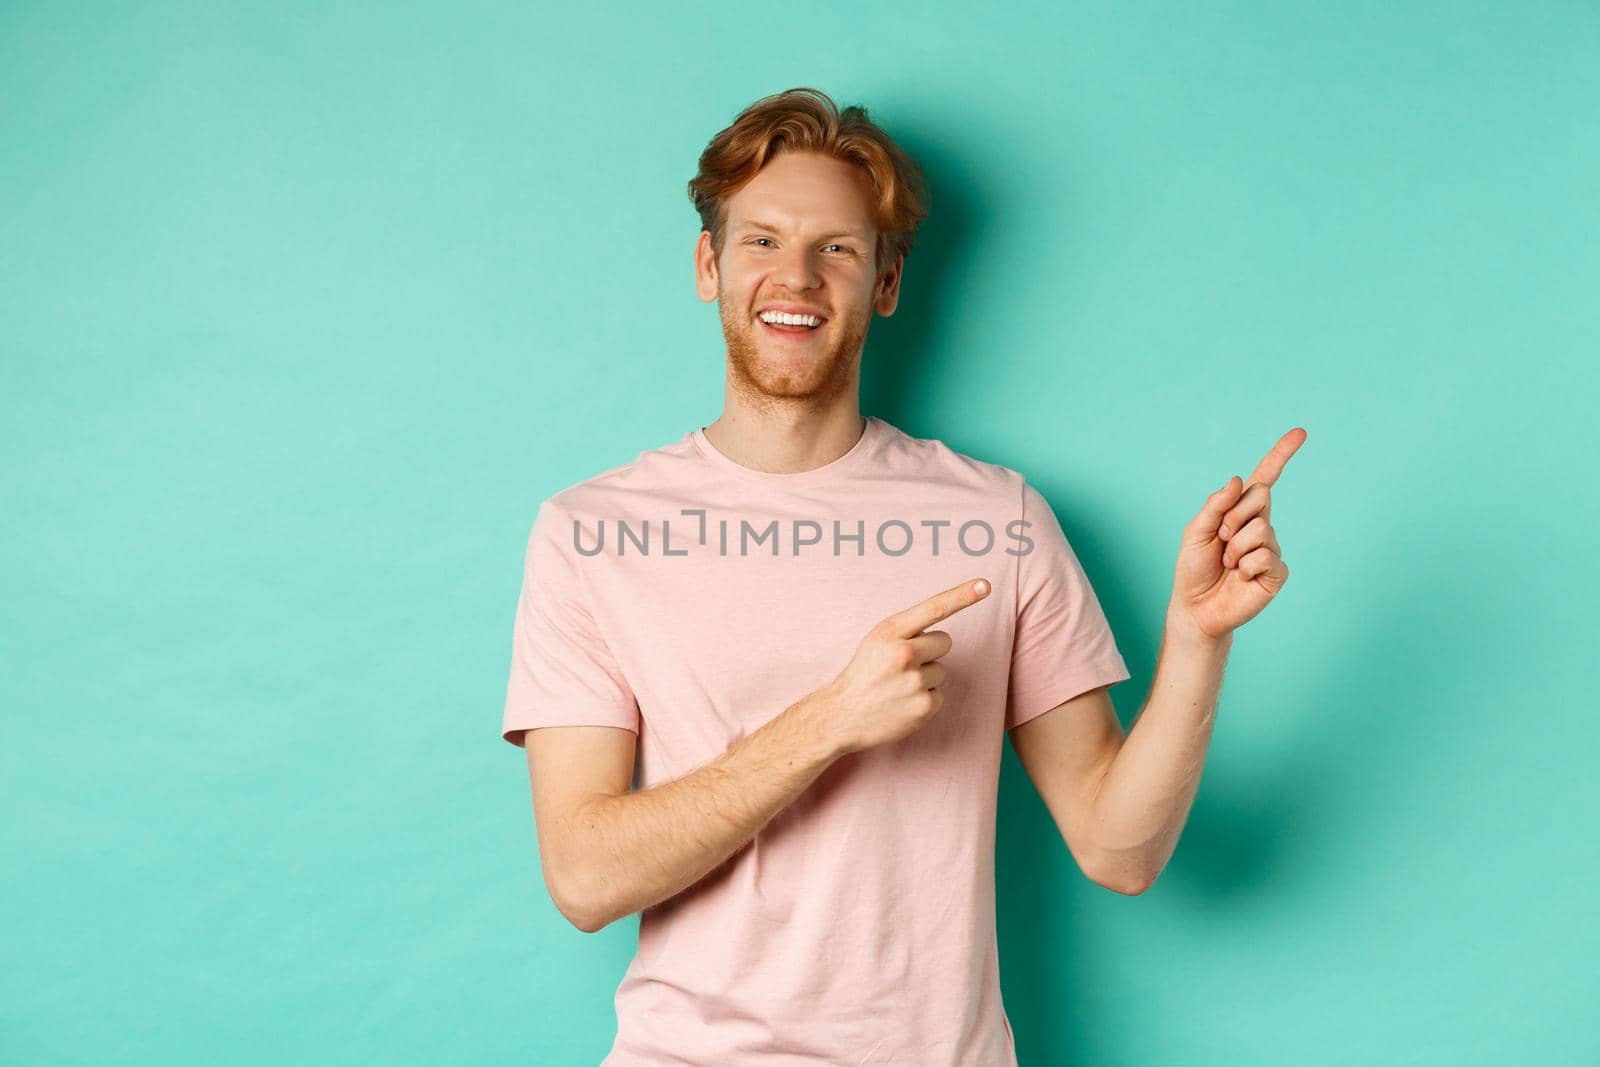 Handsome male model with red messy hair showing advertisement on copy space, pointing at upper right corner and smiling happy, standing over turquoise background.